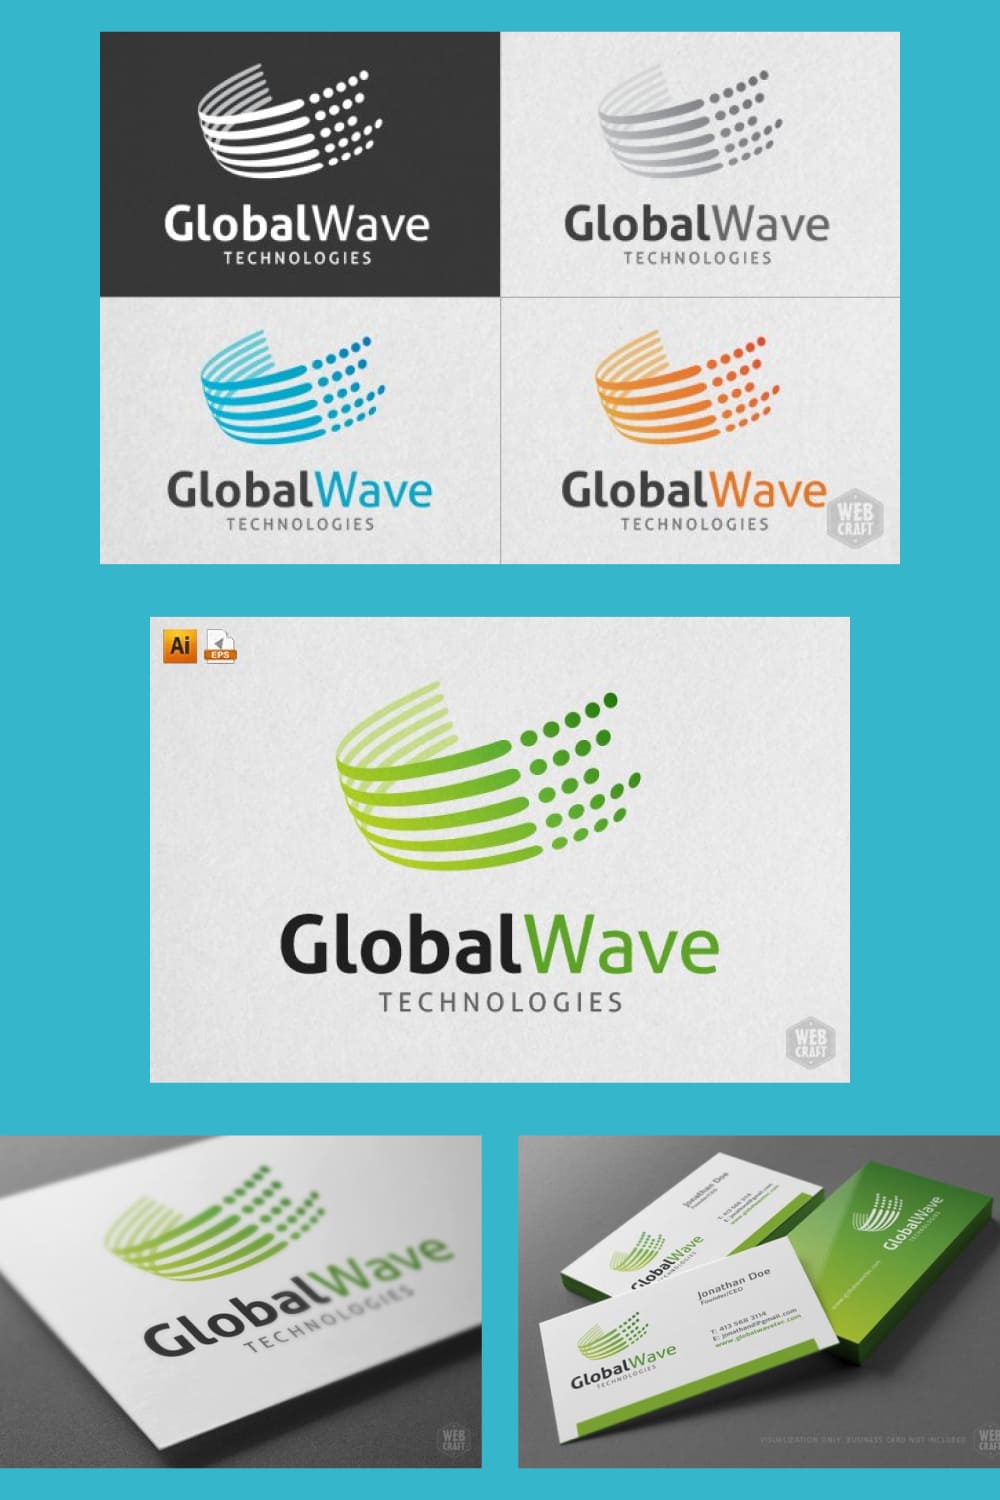 Simple and clean logo design in 3 color variations.